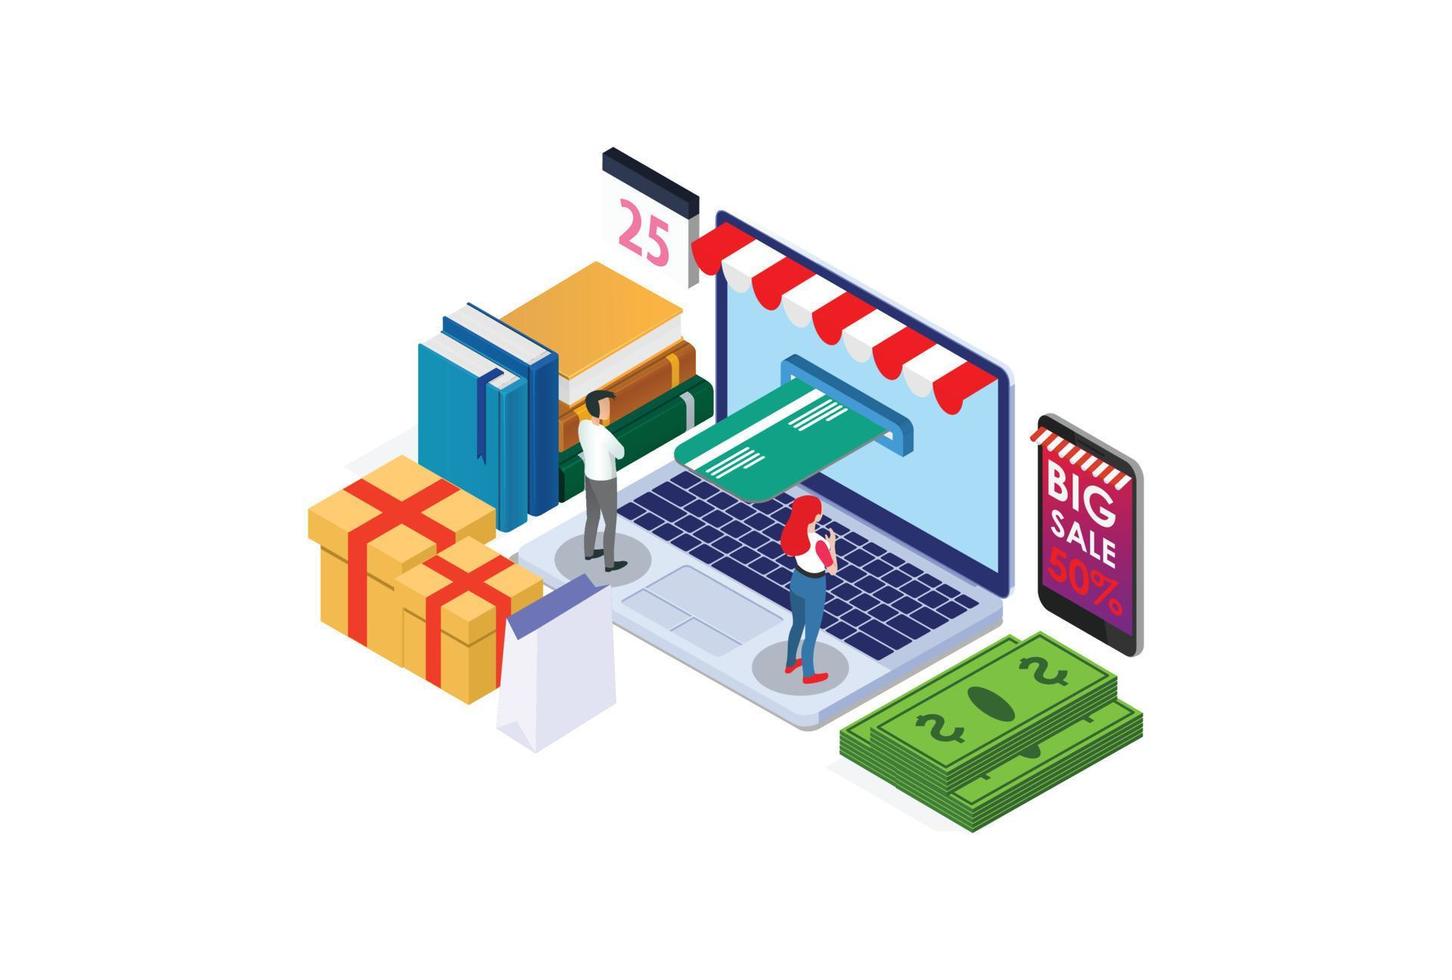 isometric Digital E-Commerce Online Shopping Delivery Illustration, Suitable for Diagrams, Infographics, Book Illustration, Game Asset, And Other Graphic Related Assets vector